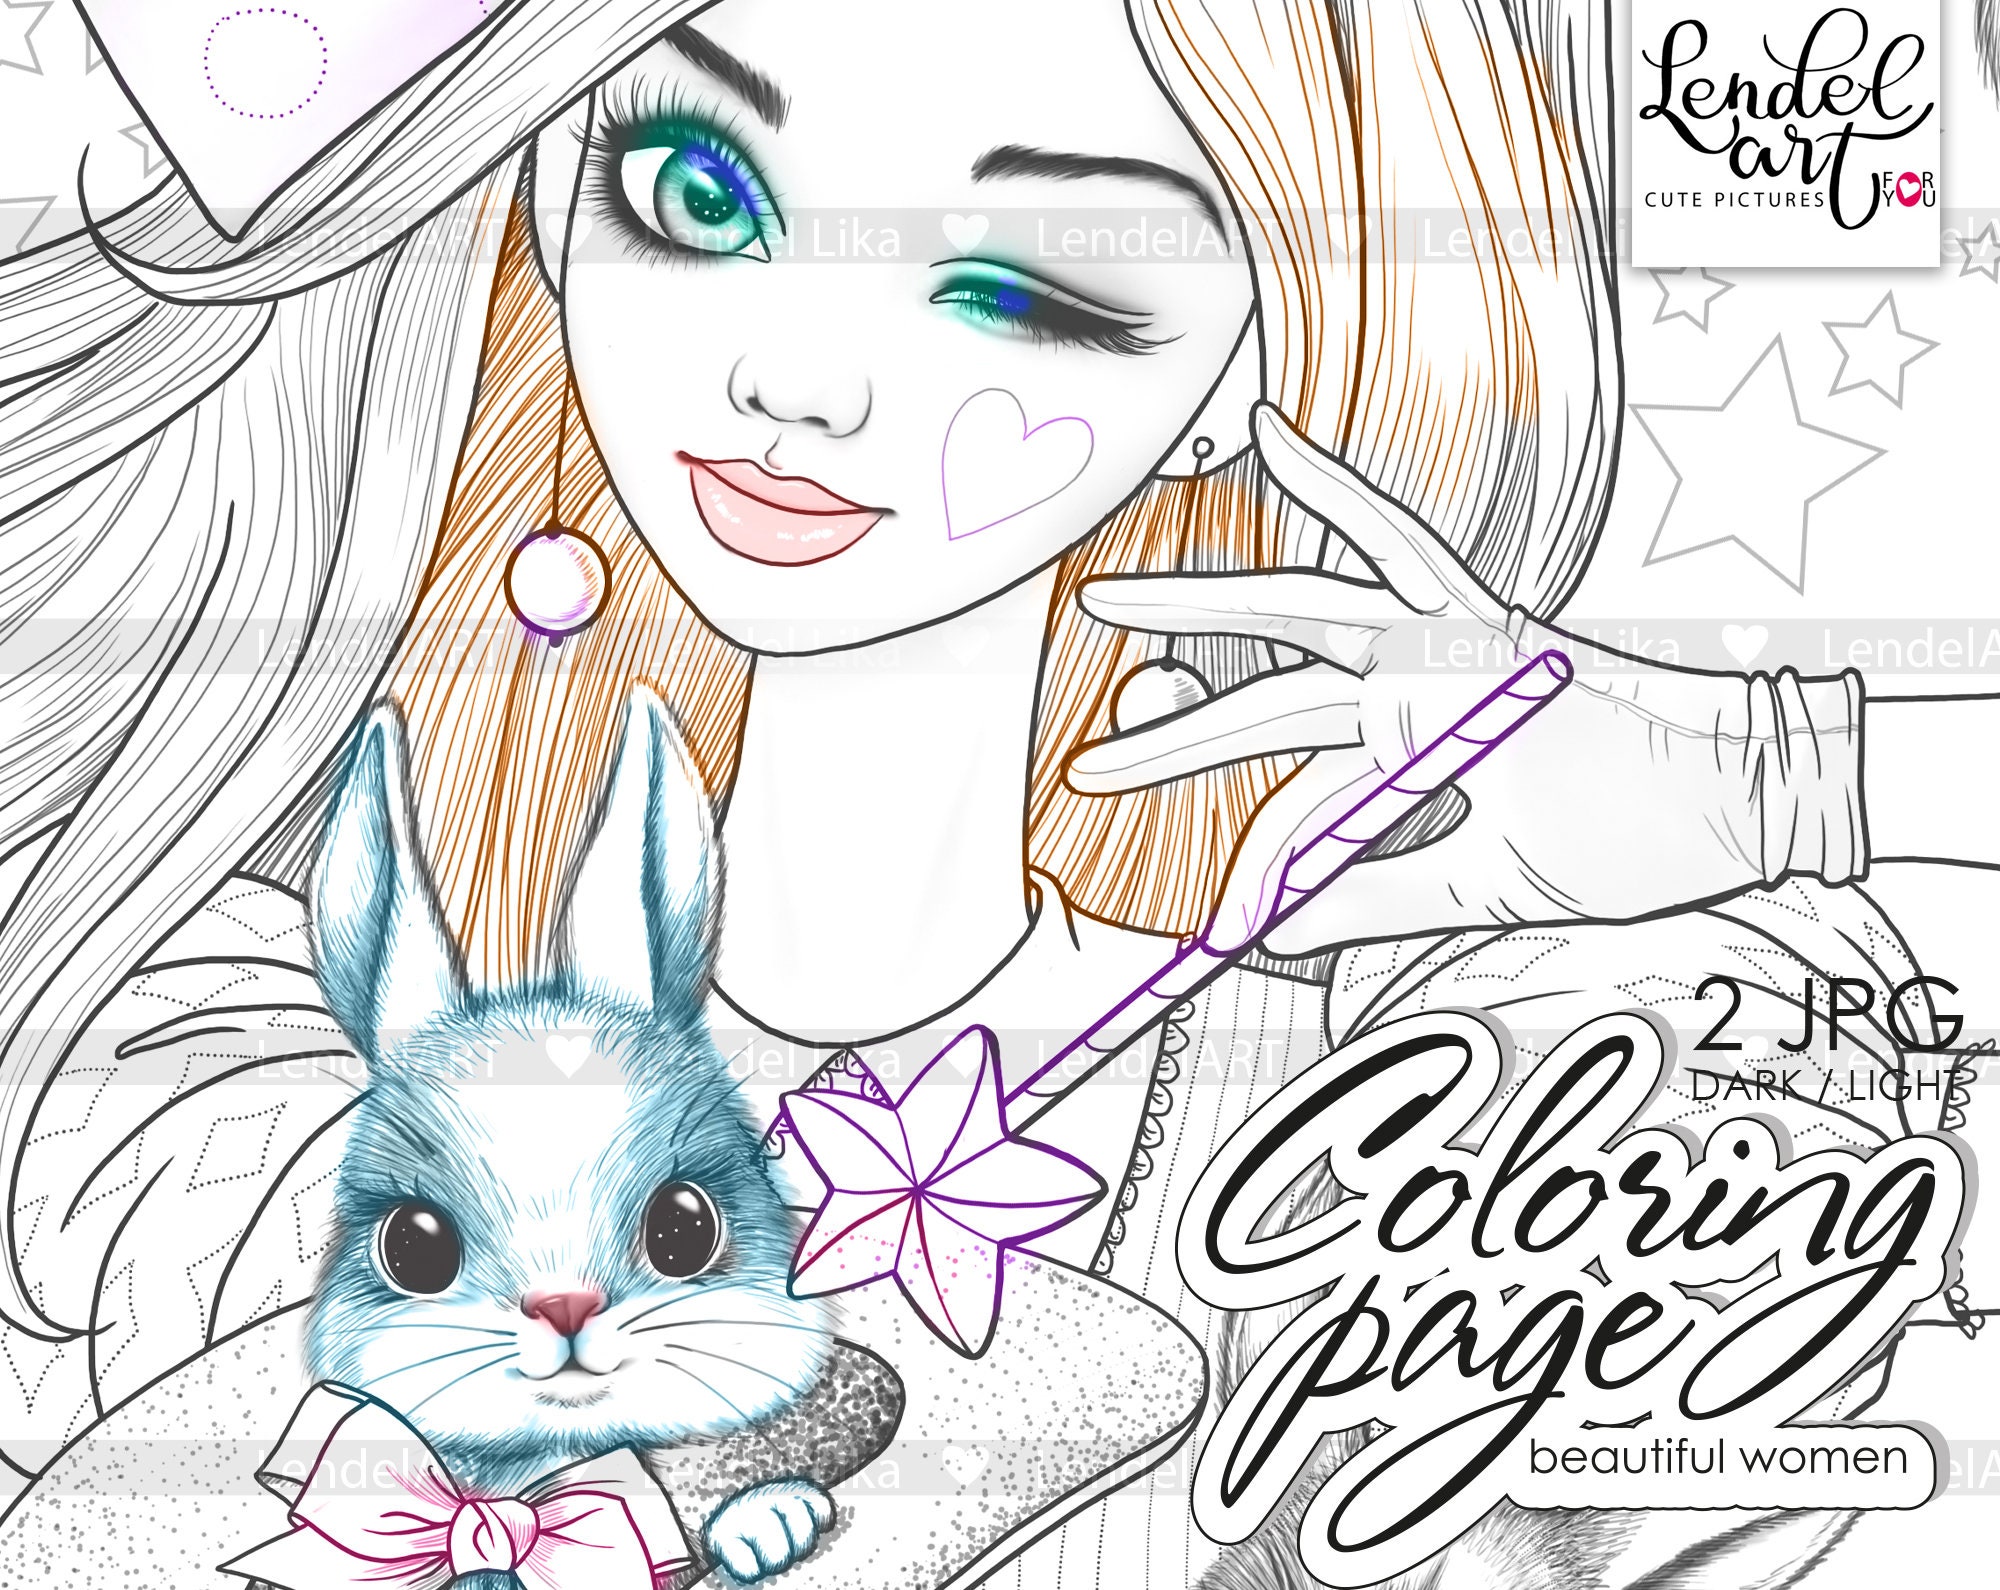 MINI Coloring Book by Lika Lendel  Adult Colouring Book Flip Through 